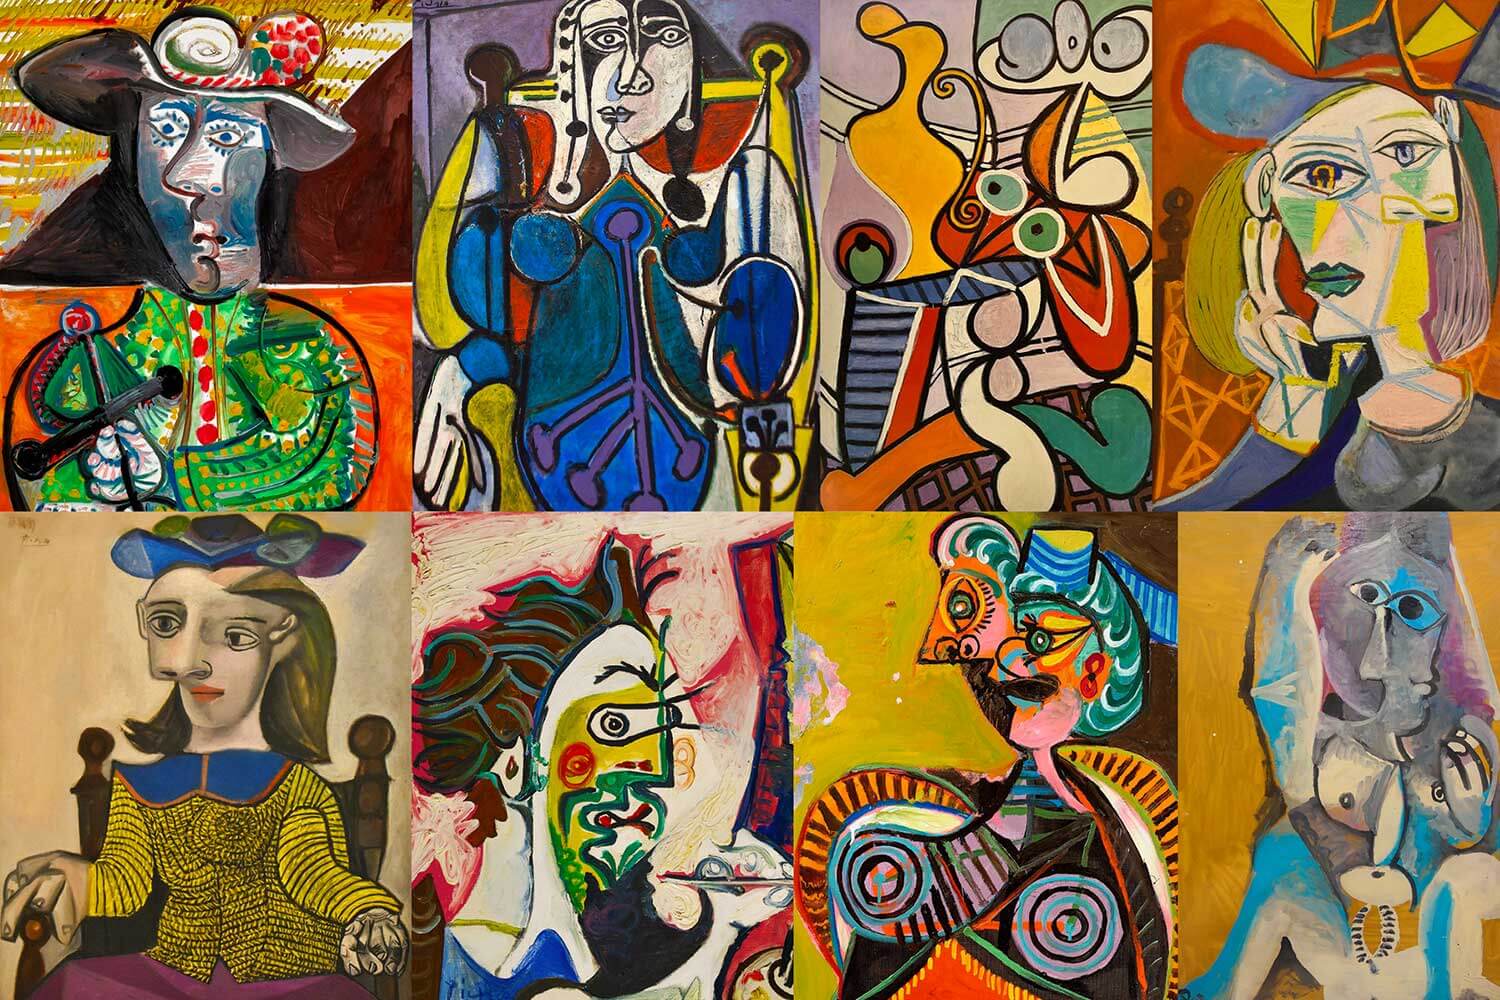 Pablo Picasso - The Most Iconic Artist